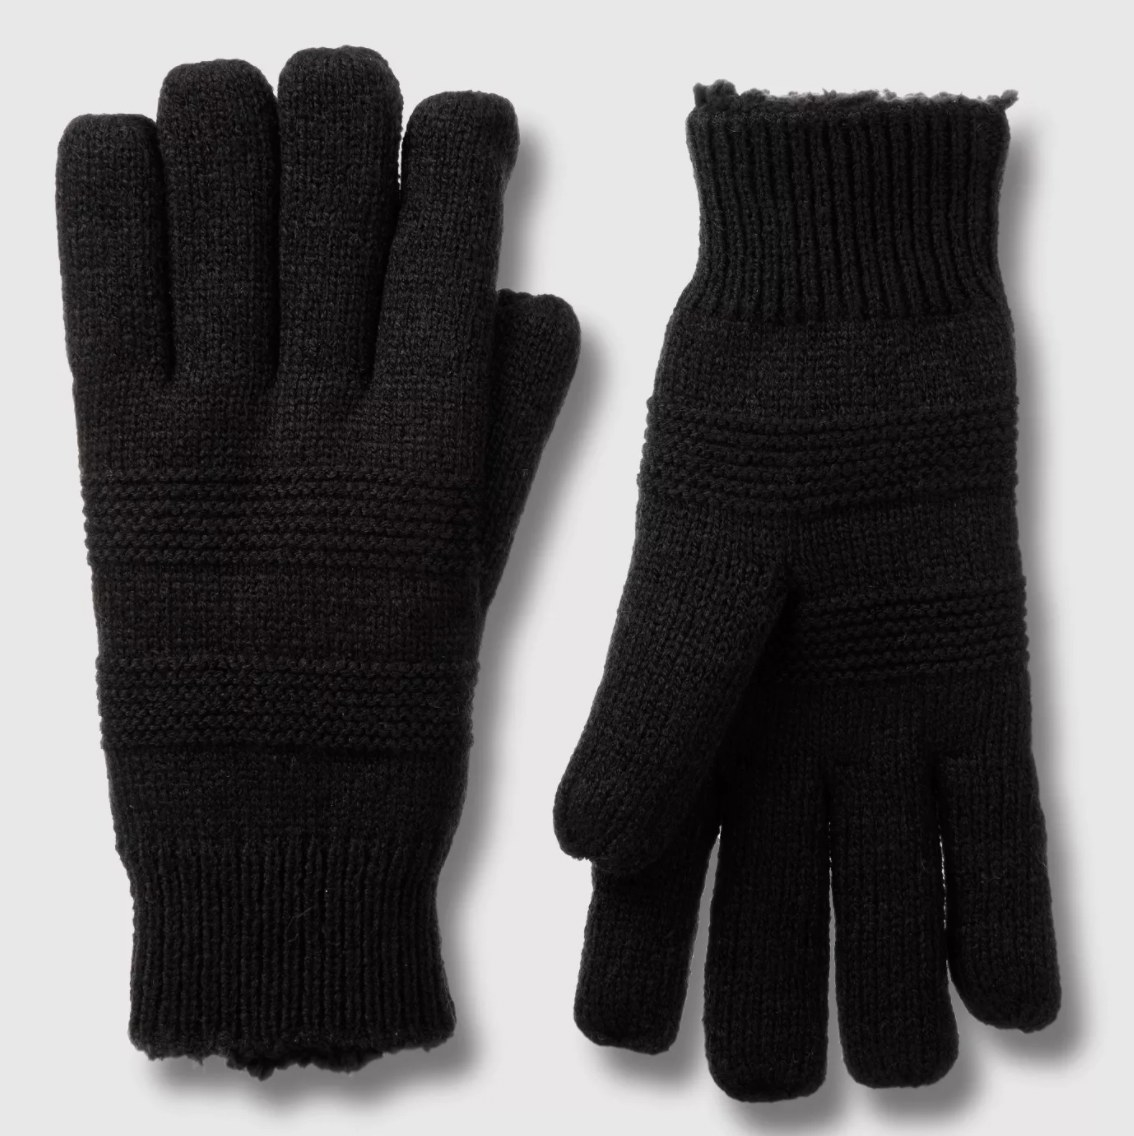 Pair of black touch screen knit gloves